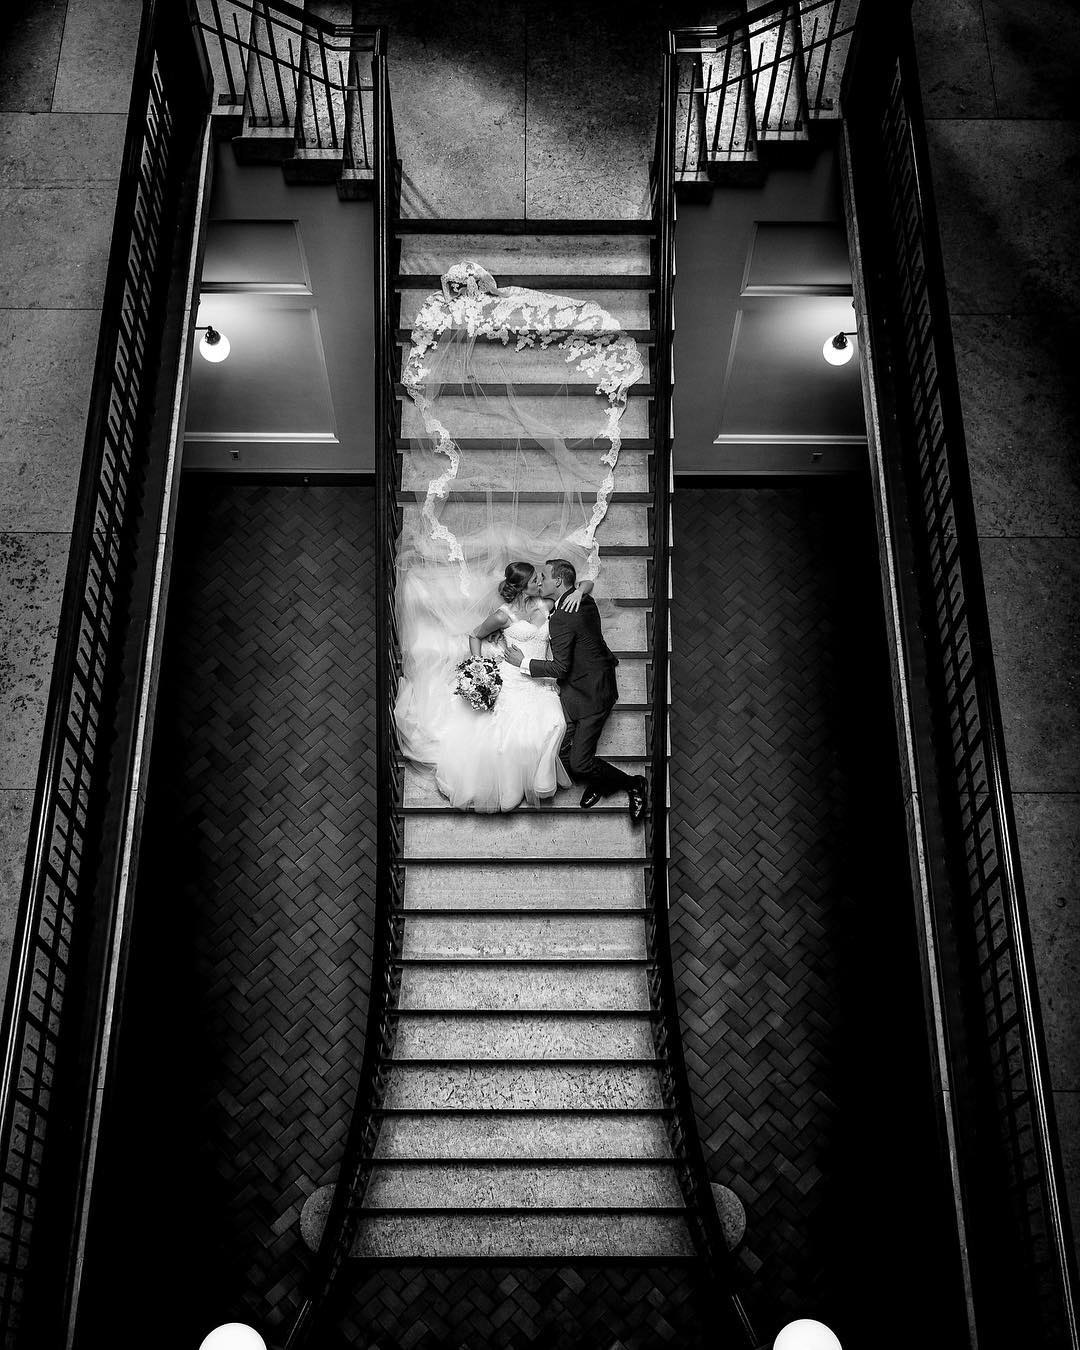 a wedding couple kissing lying down on the stairs in their wedding attire